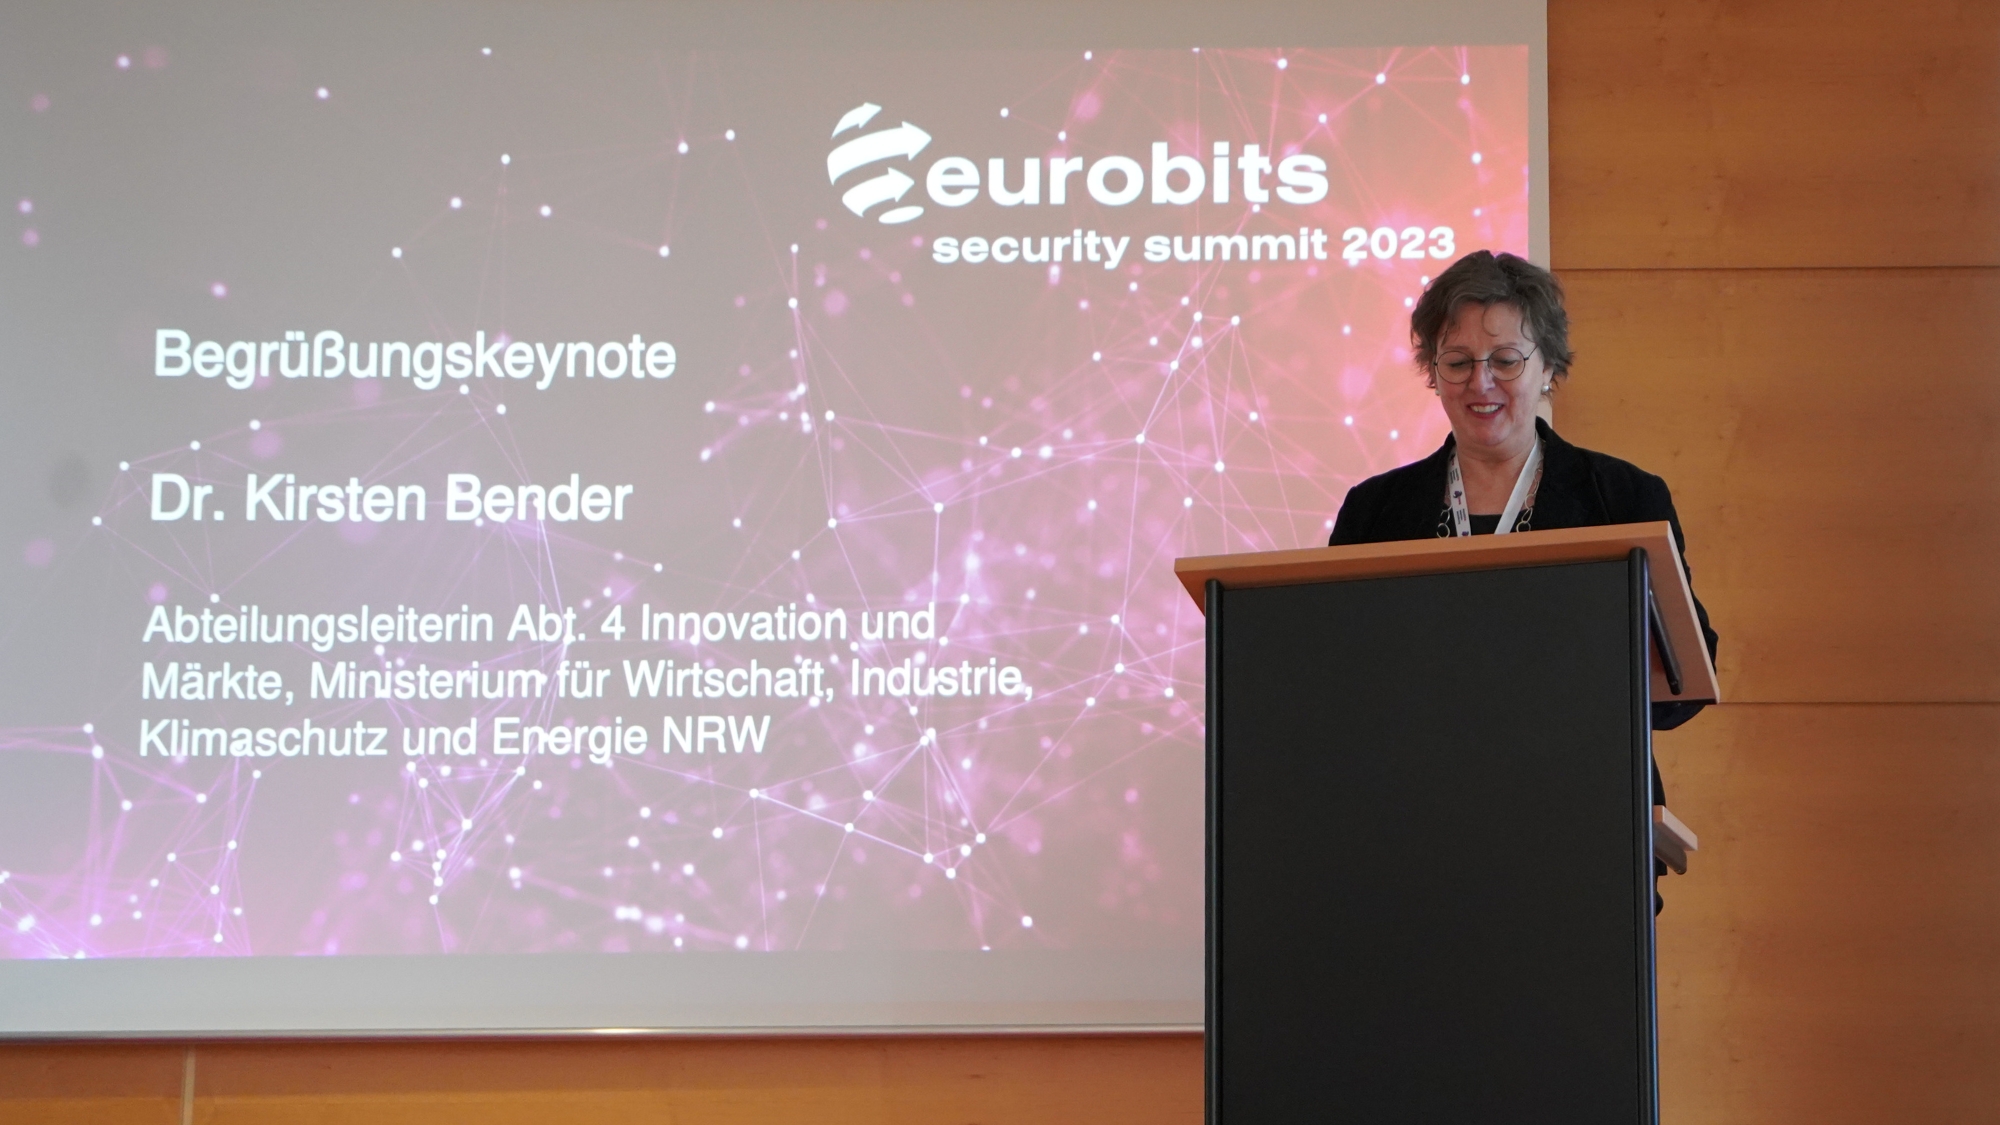 This is what our eurobits security summit 2023 was like